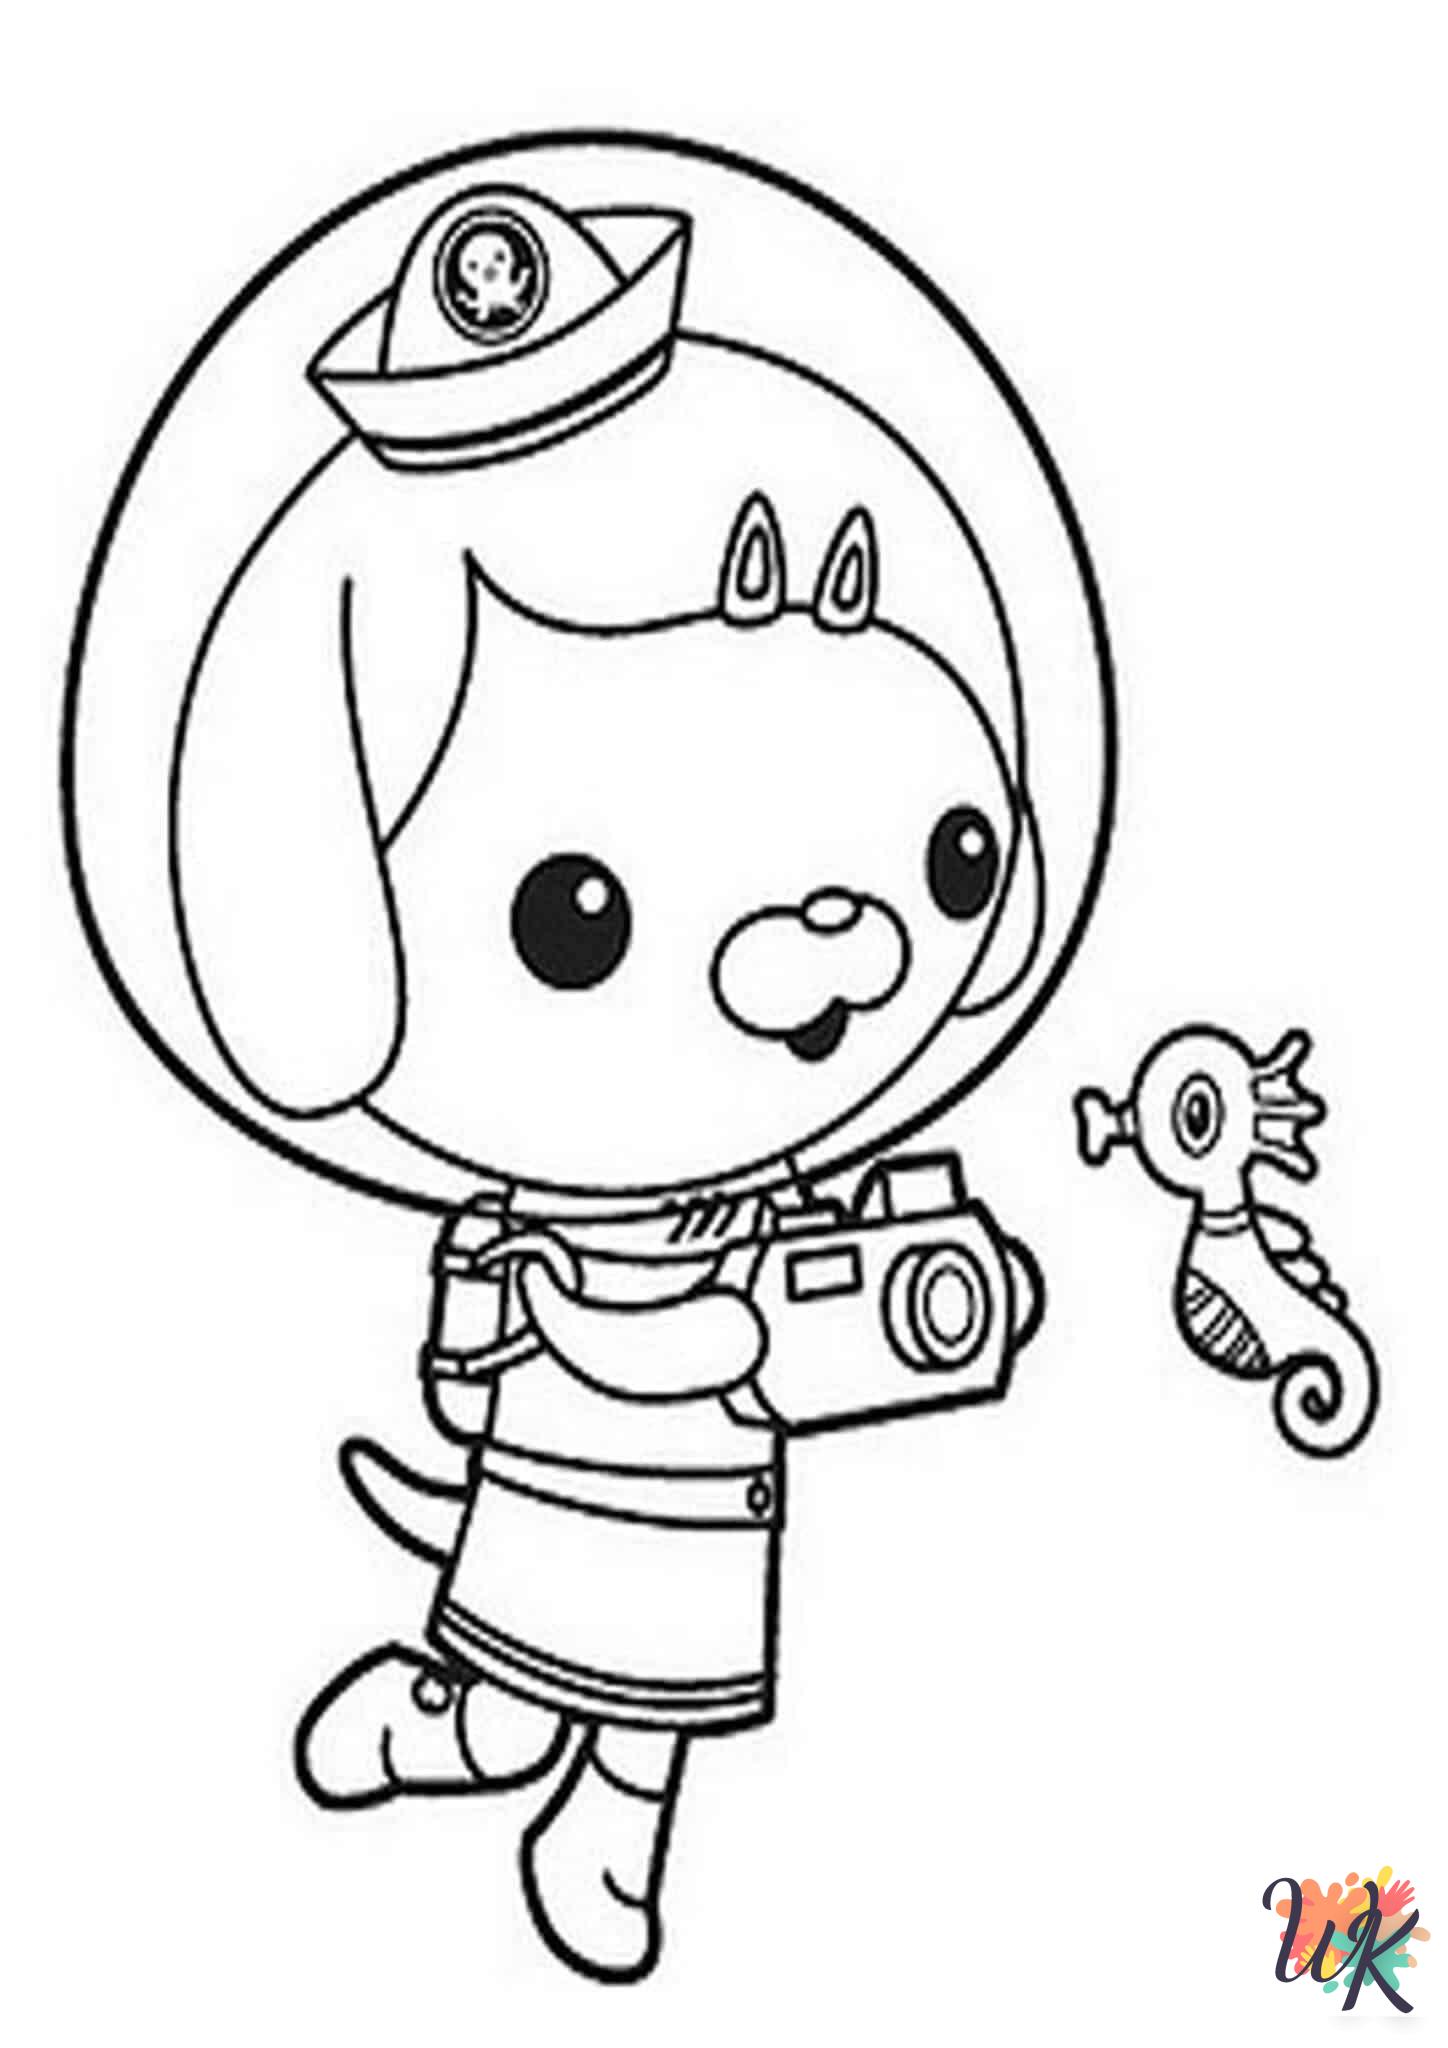 Octonauts cards coloring pages